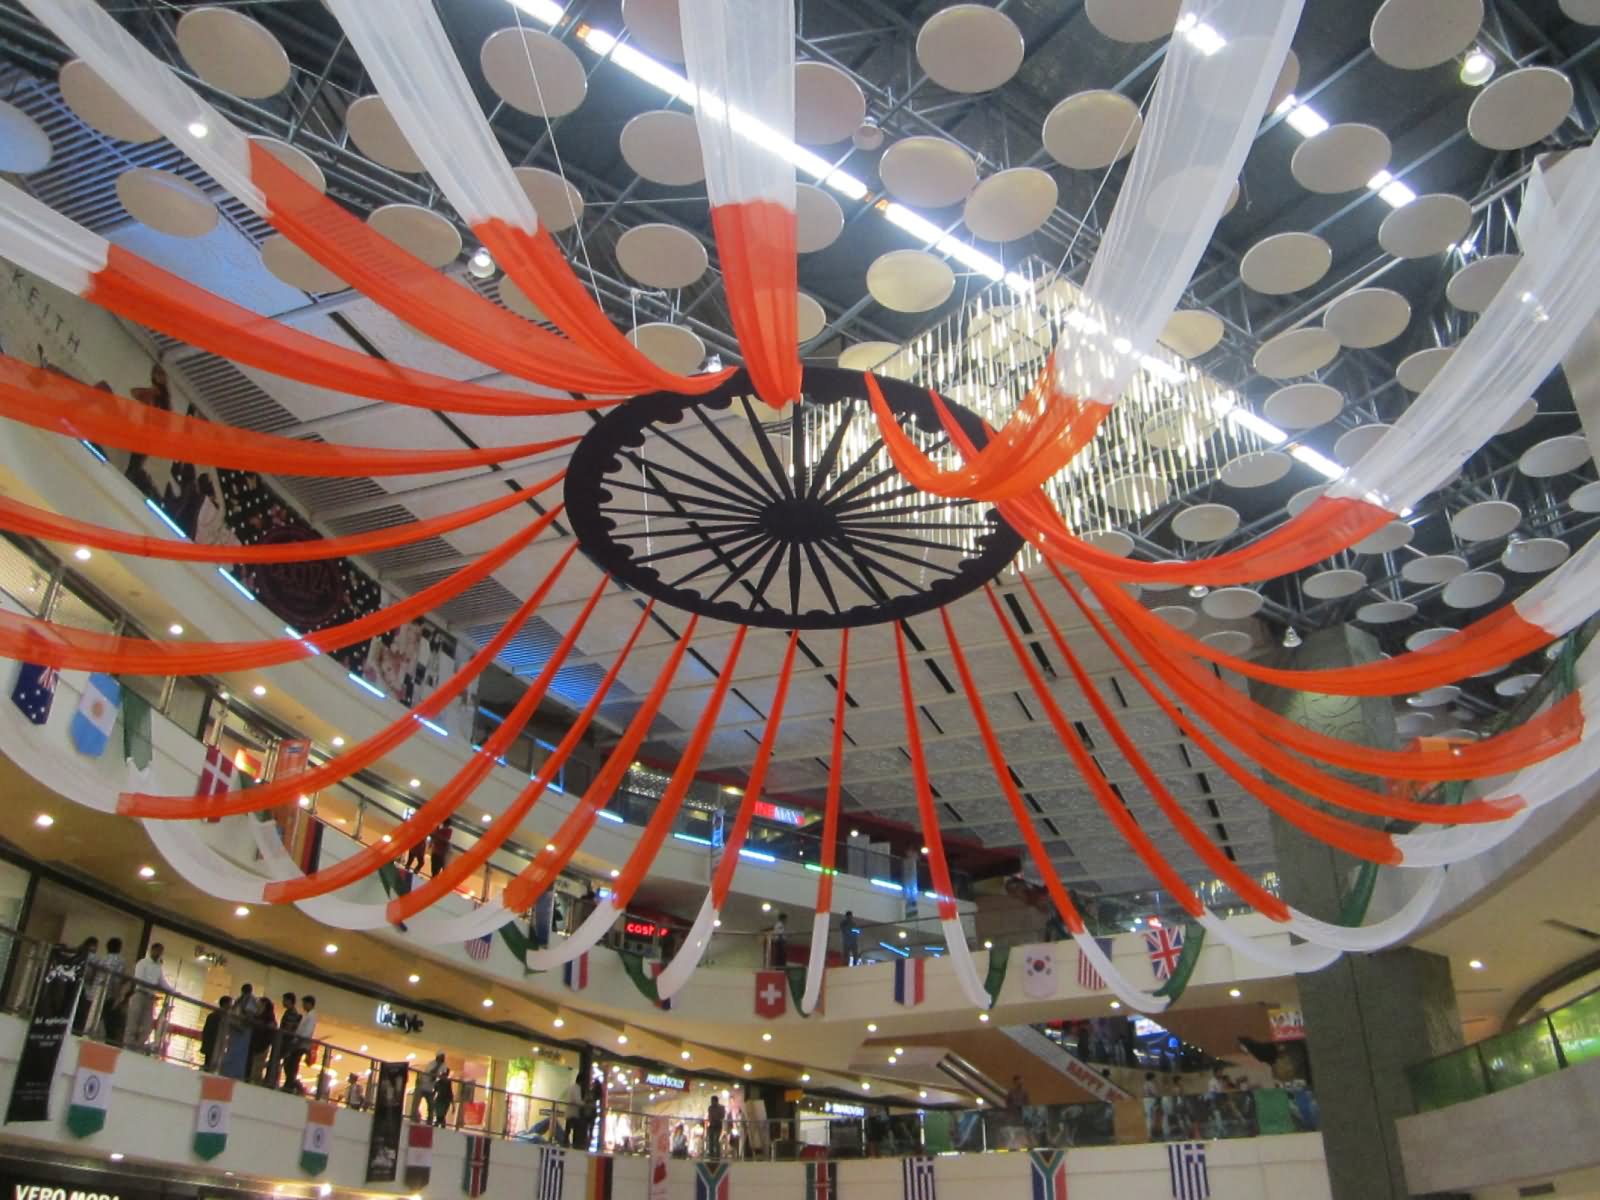 Pacific Mall In Delhi Decorated During The Independence Day Of India Celebrations